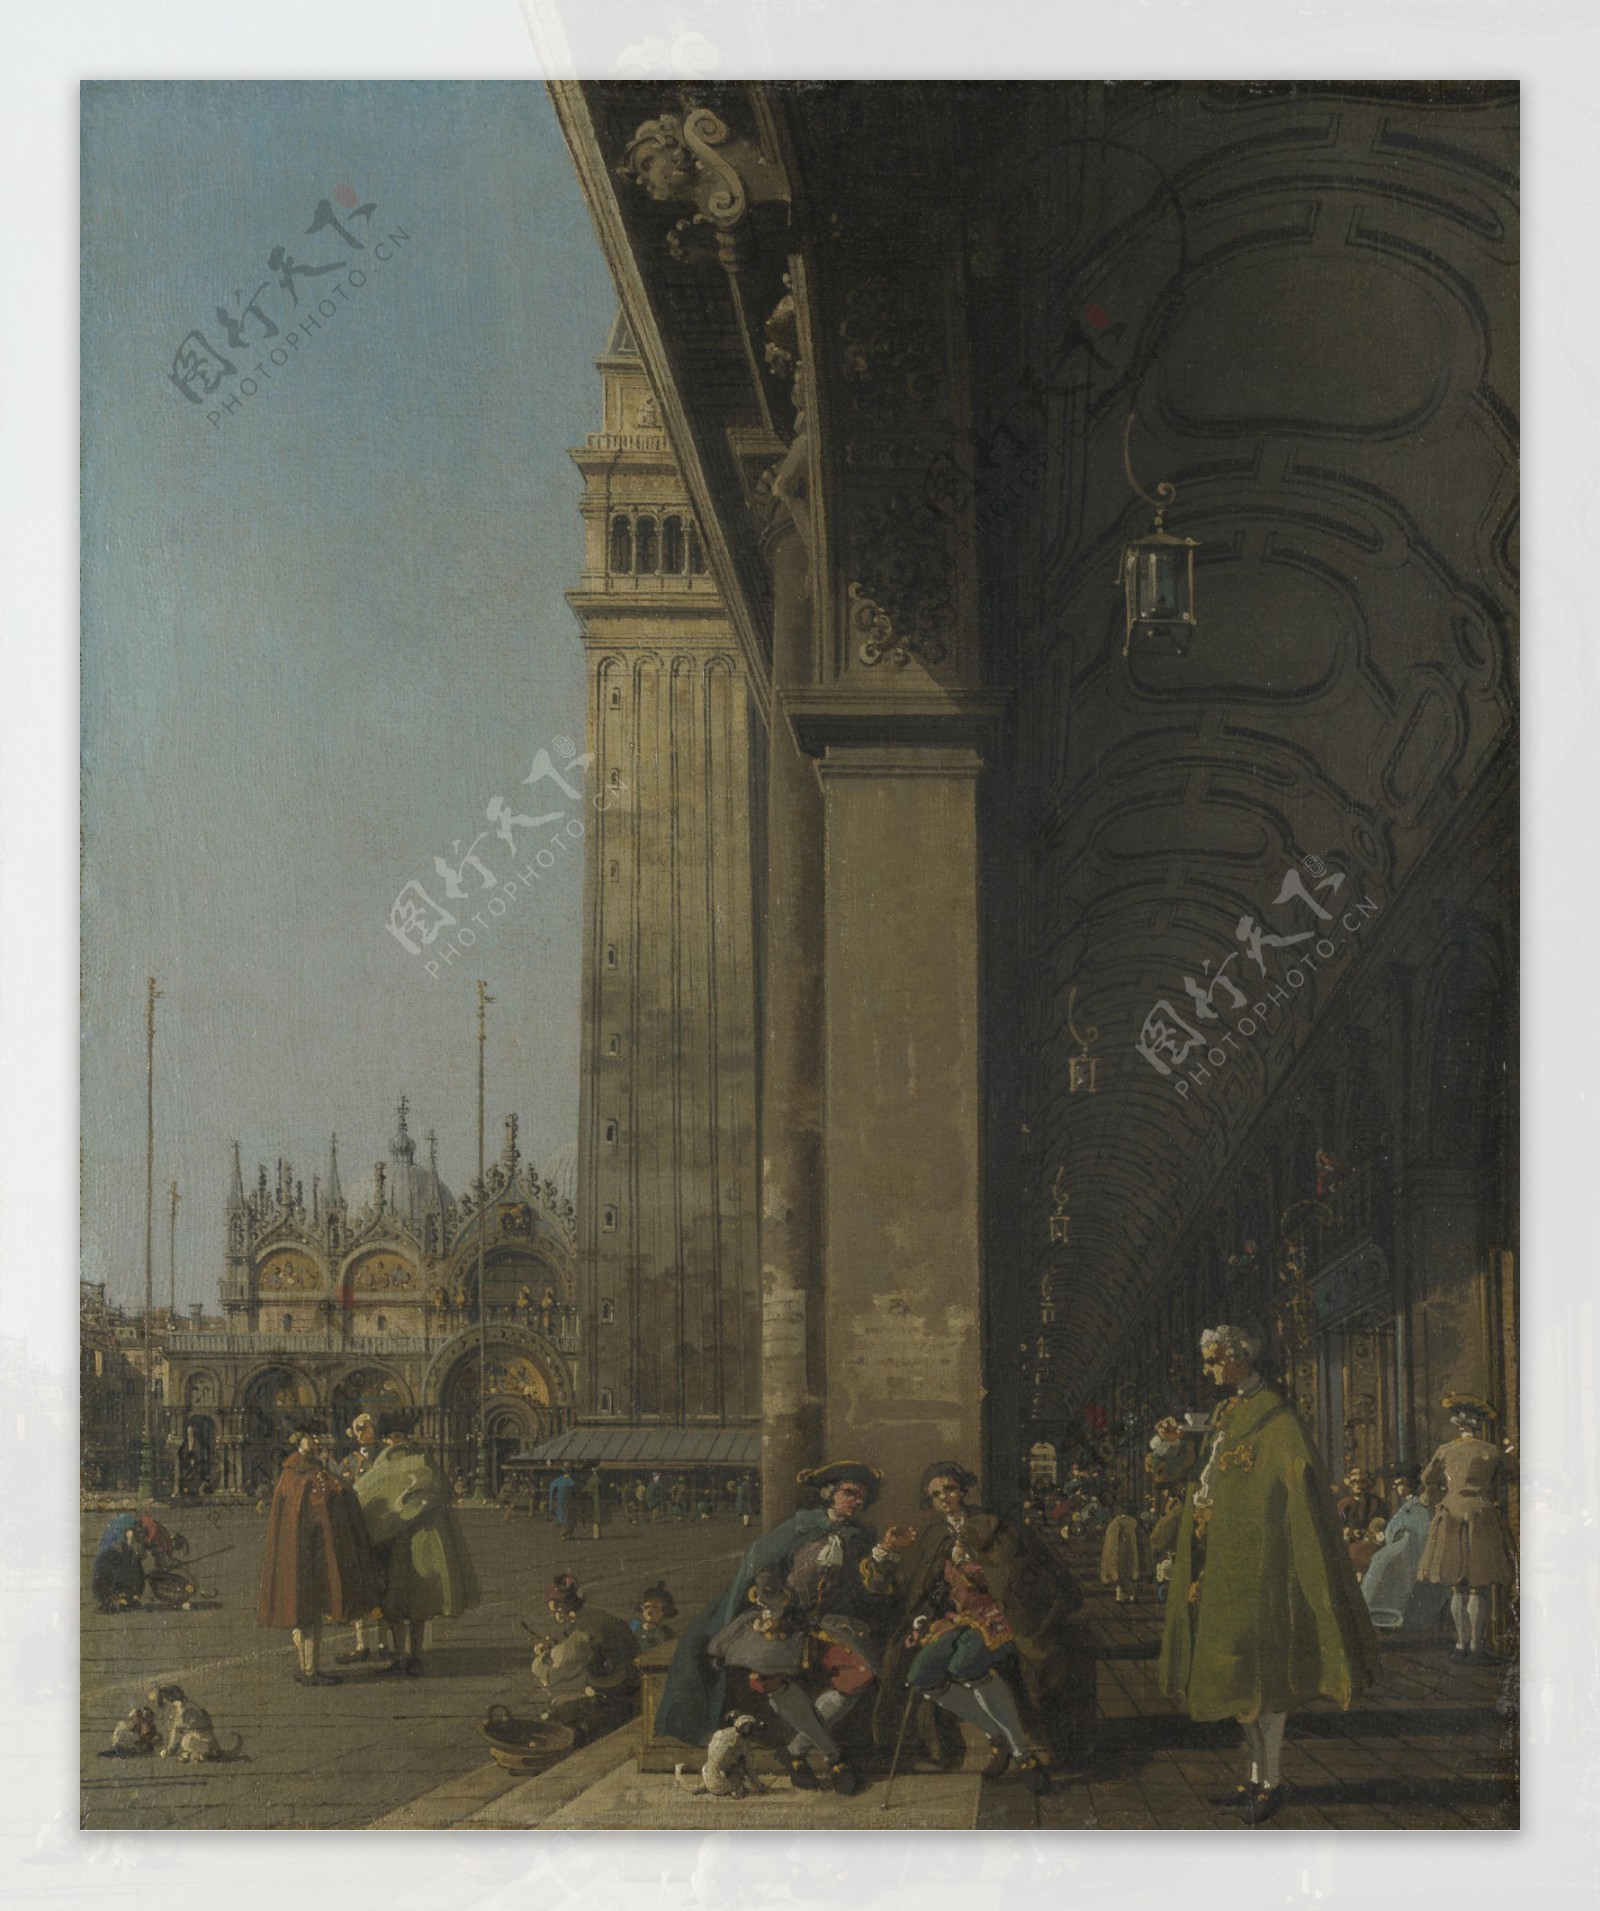 CanalettoVeniceThePiazzaSanMarco画家古典画古典建筑古典景物装饰画油画